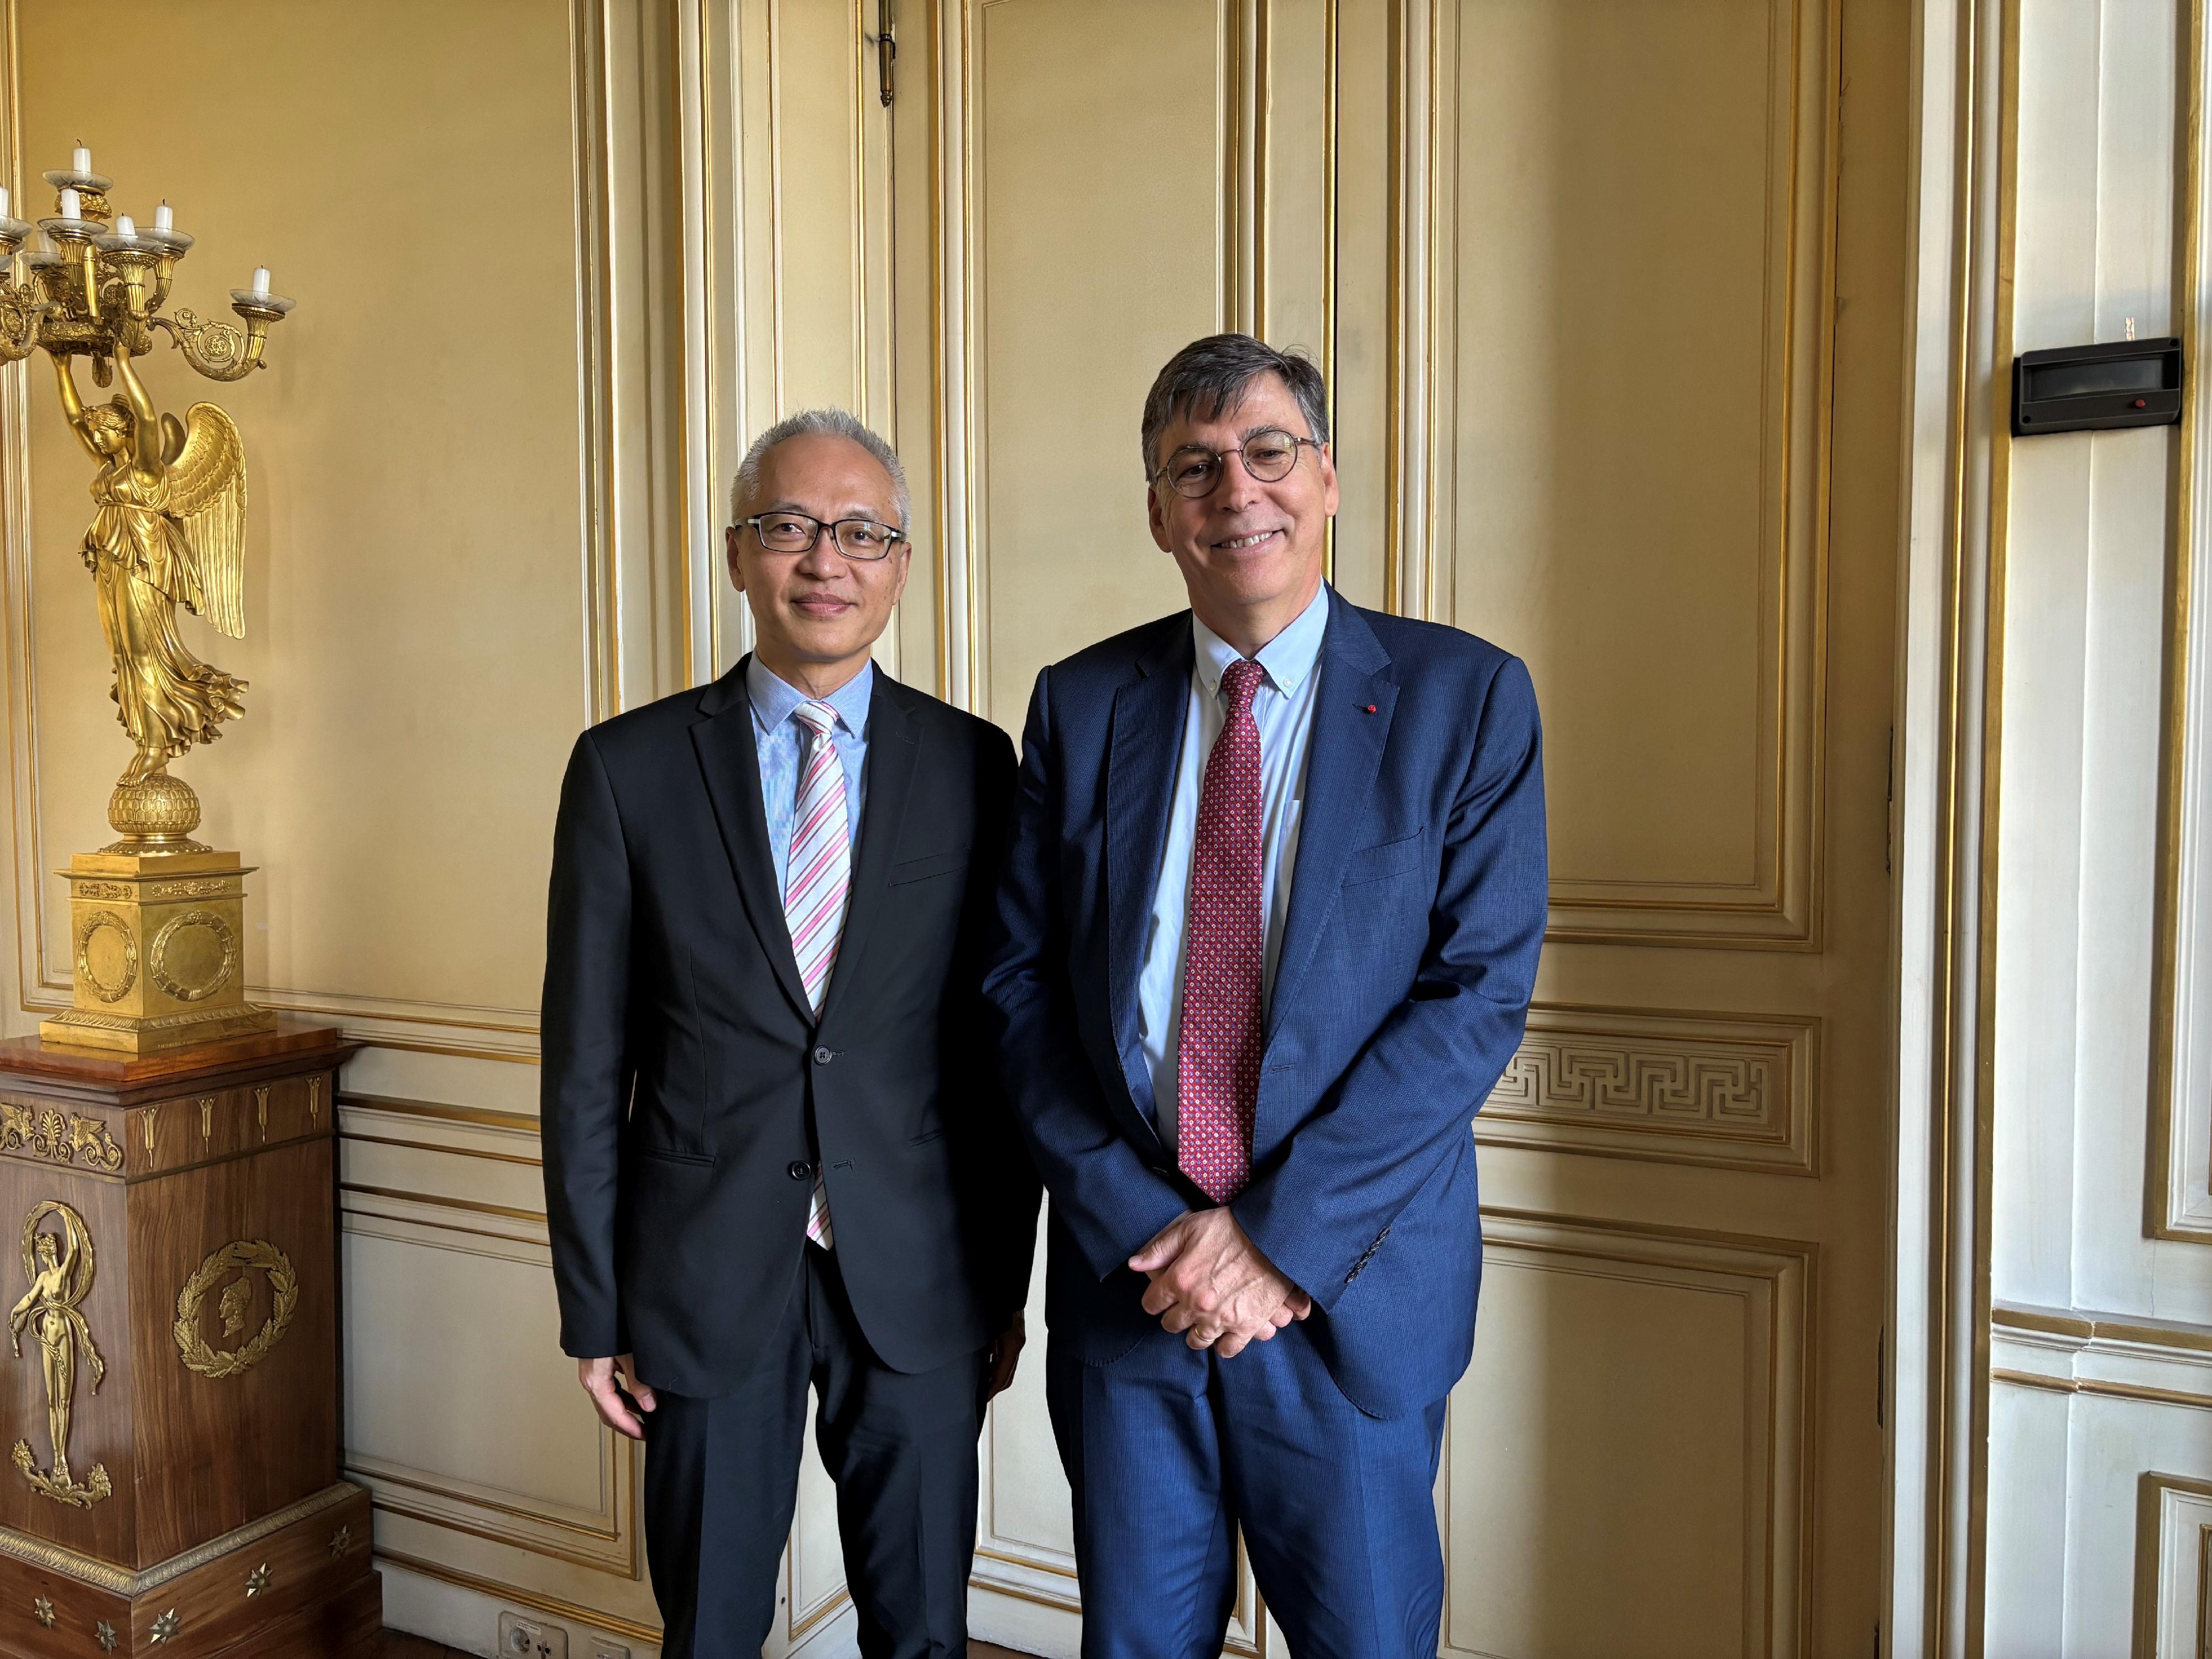 Deputy Chief Executive of the Hong Kong Monetary Authority Mr Howard Lee (left), meets First Deputy Governor of the Banque de France Mr Denis Beau (right), in Paris to exchange views and discuss cross-border collaboration opportunities.